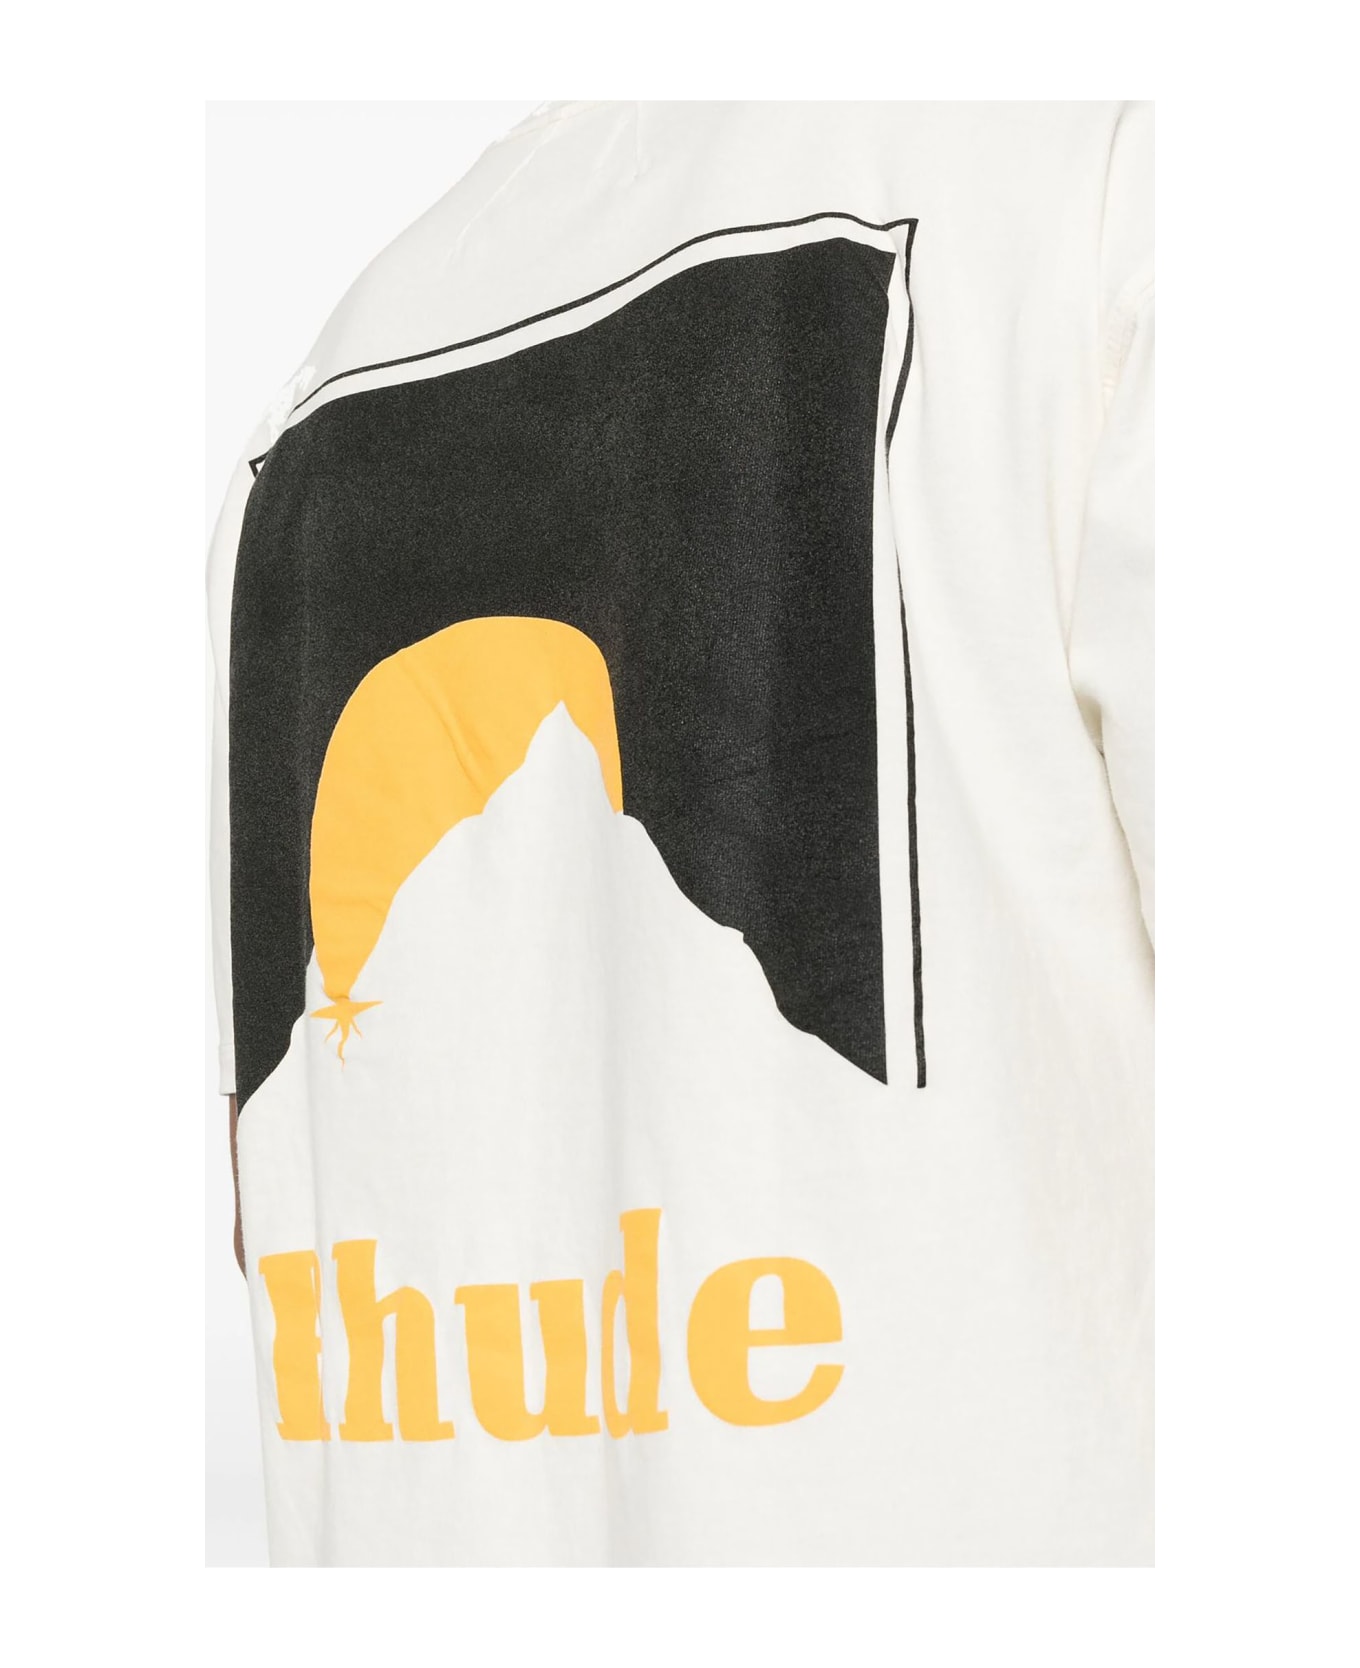 Rhude T-shirts And Polos White - White